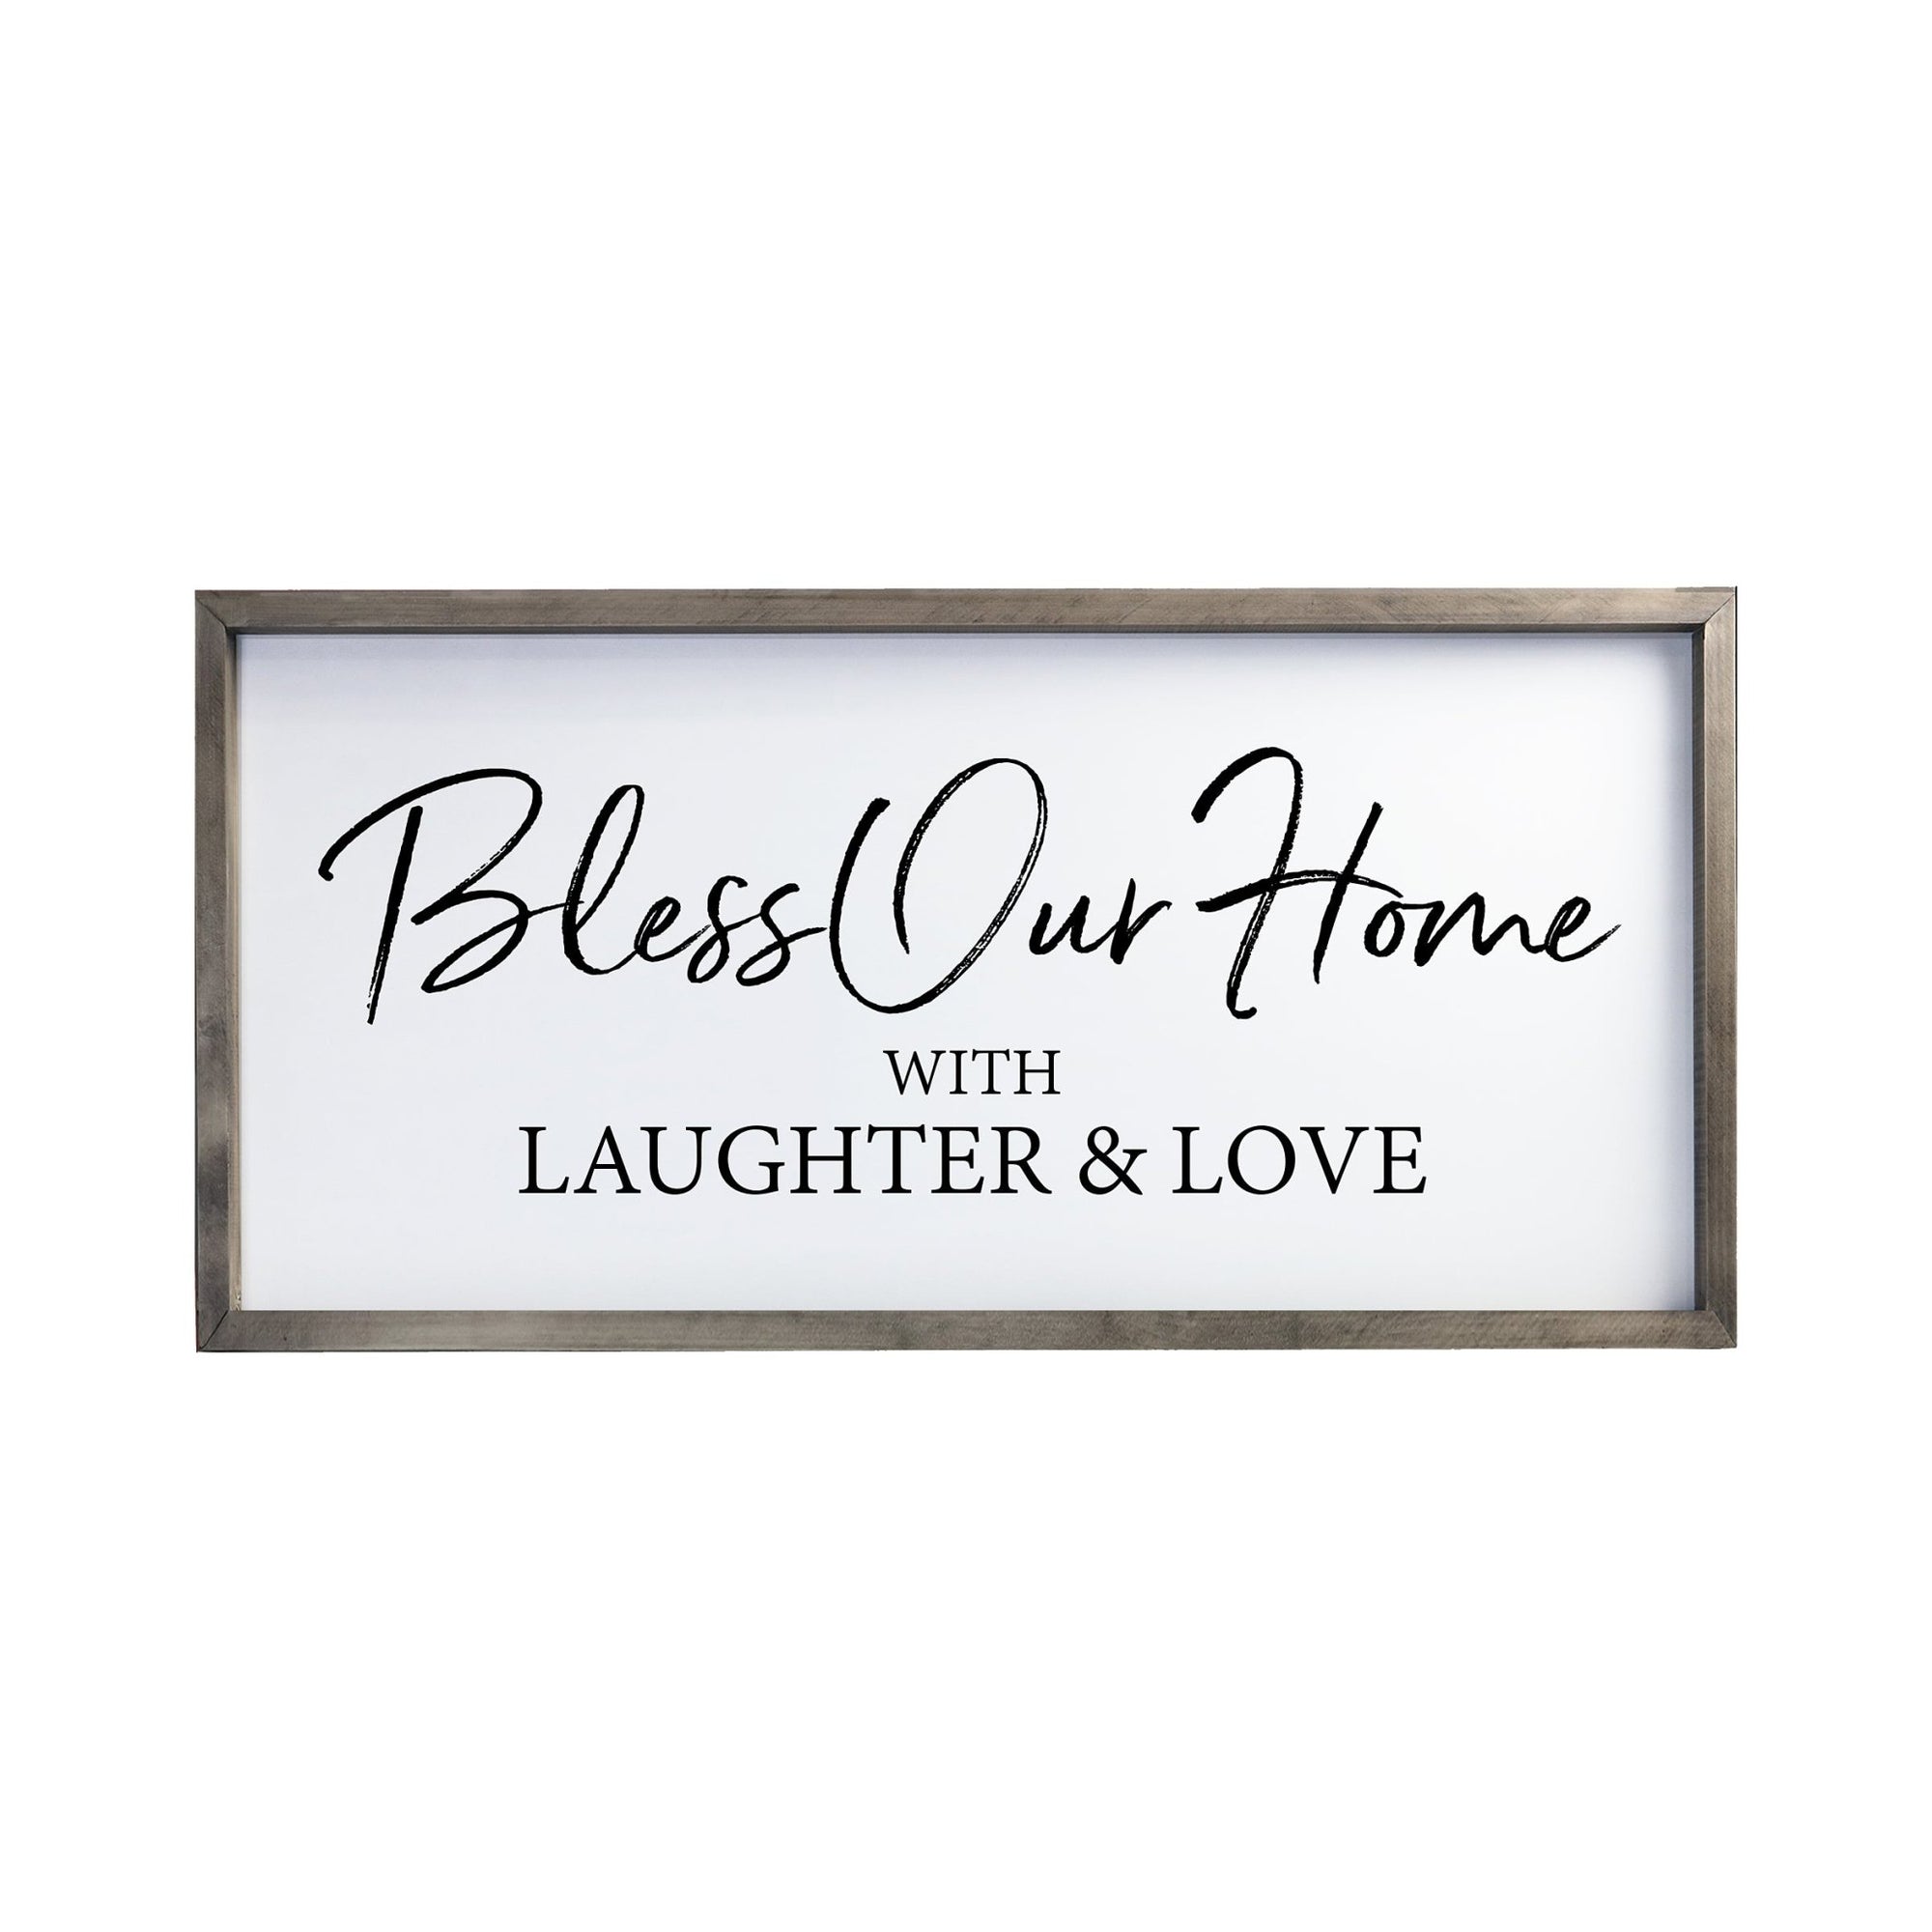 Large Family Wall Decor Quote Sign For Home 18 x 36 - Bless Our Home - LifeSong Milestones